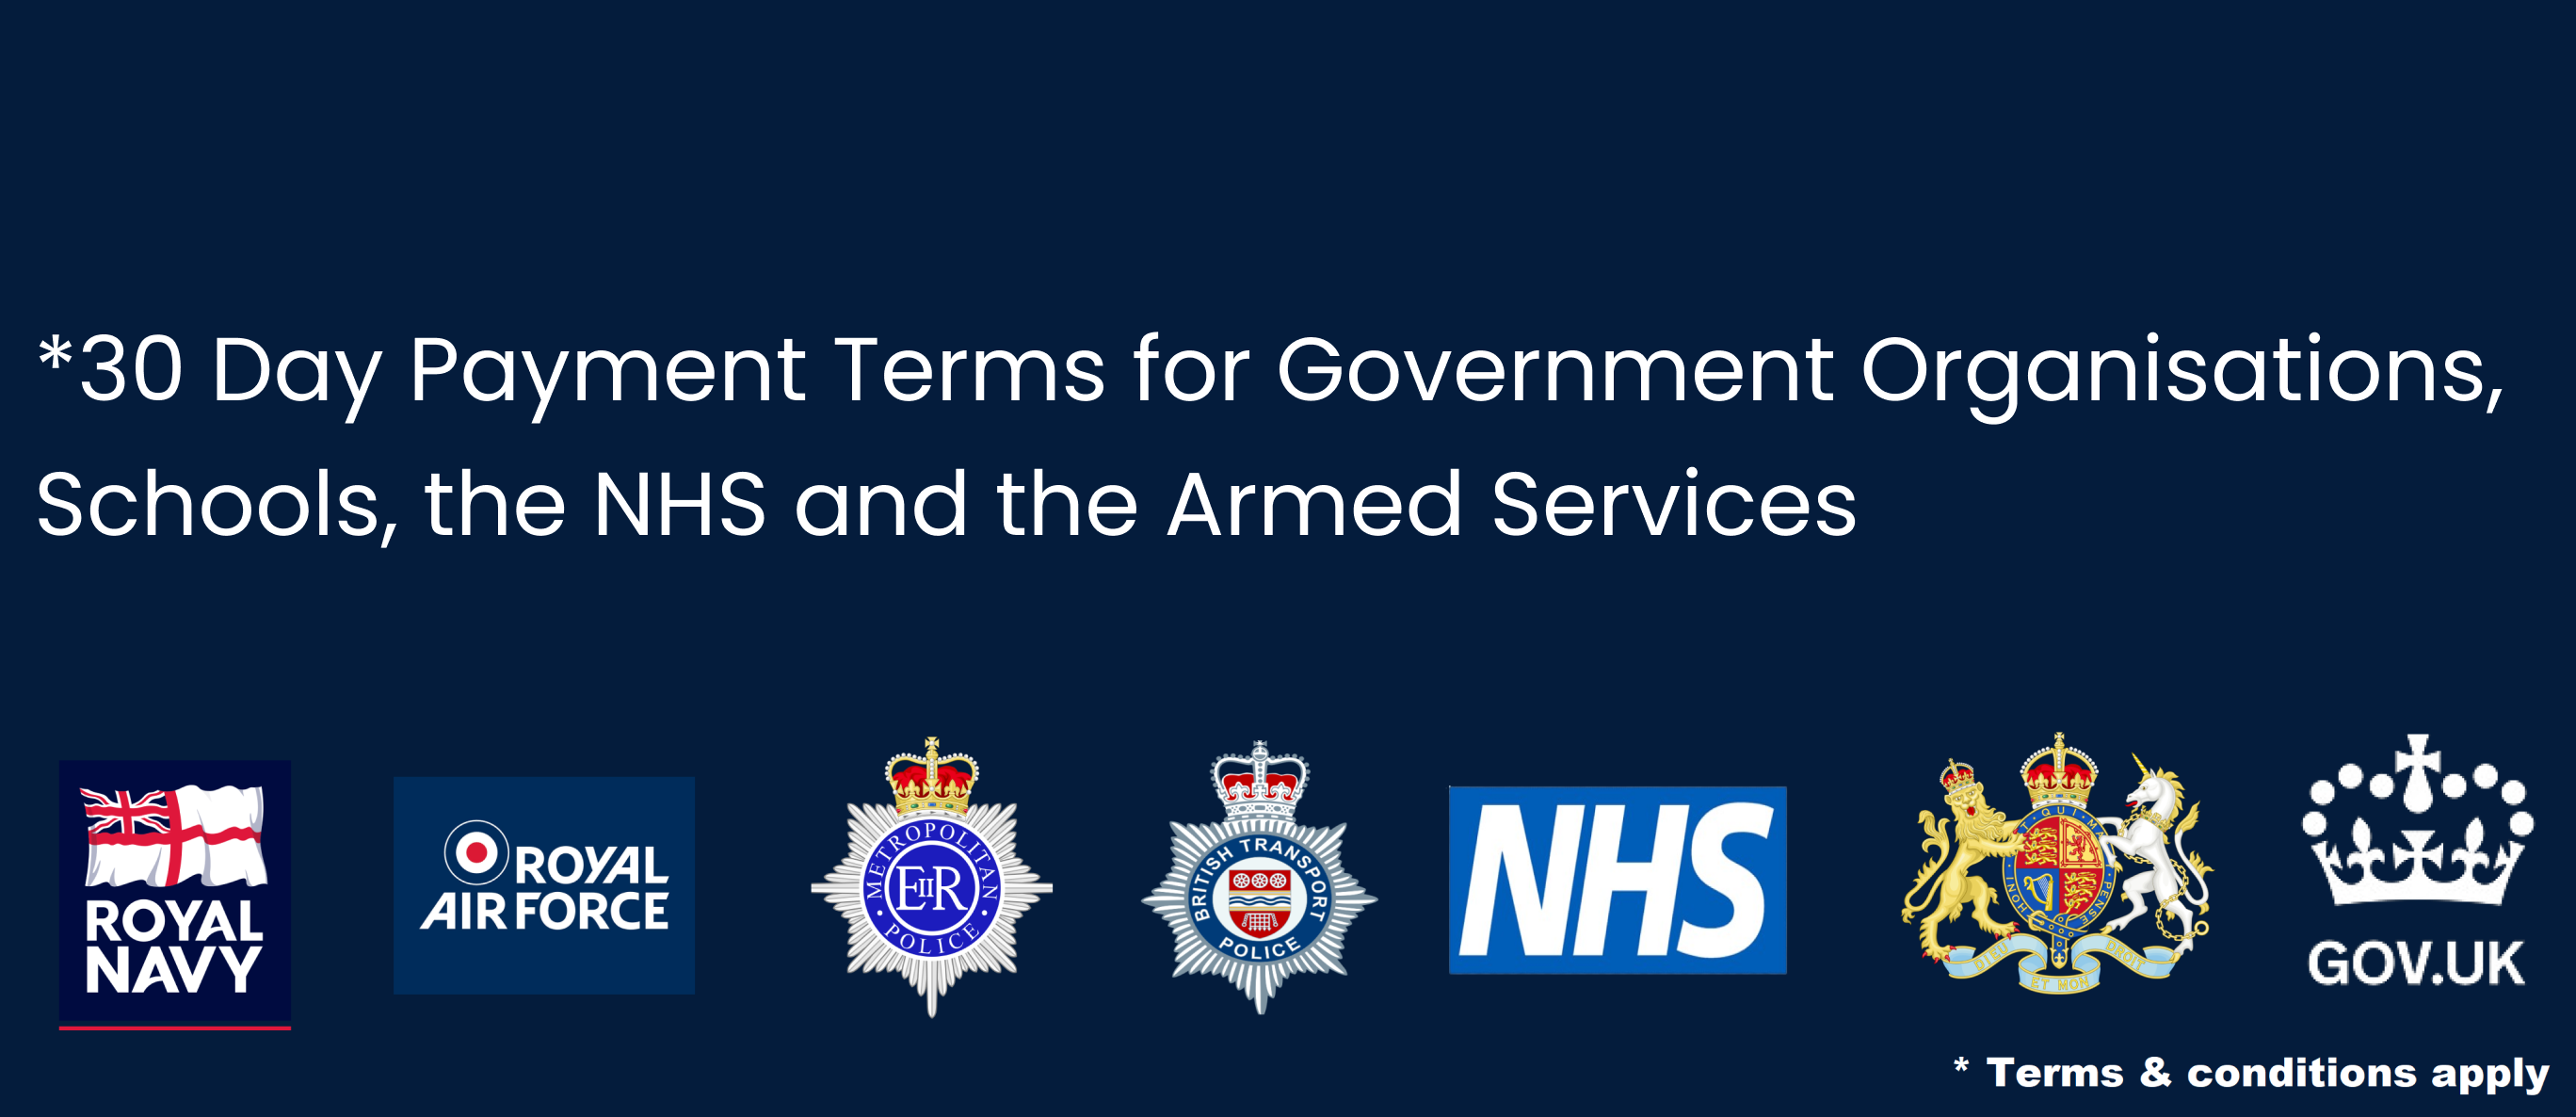 I.C. Brindle offers 30-day payment terms for government organisations, schools, the NHS, and armed services. Notable organisations who I.C. Brindle have worked with before are visible below the text, such as the RAF, NHS, and Royal Navy. 